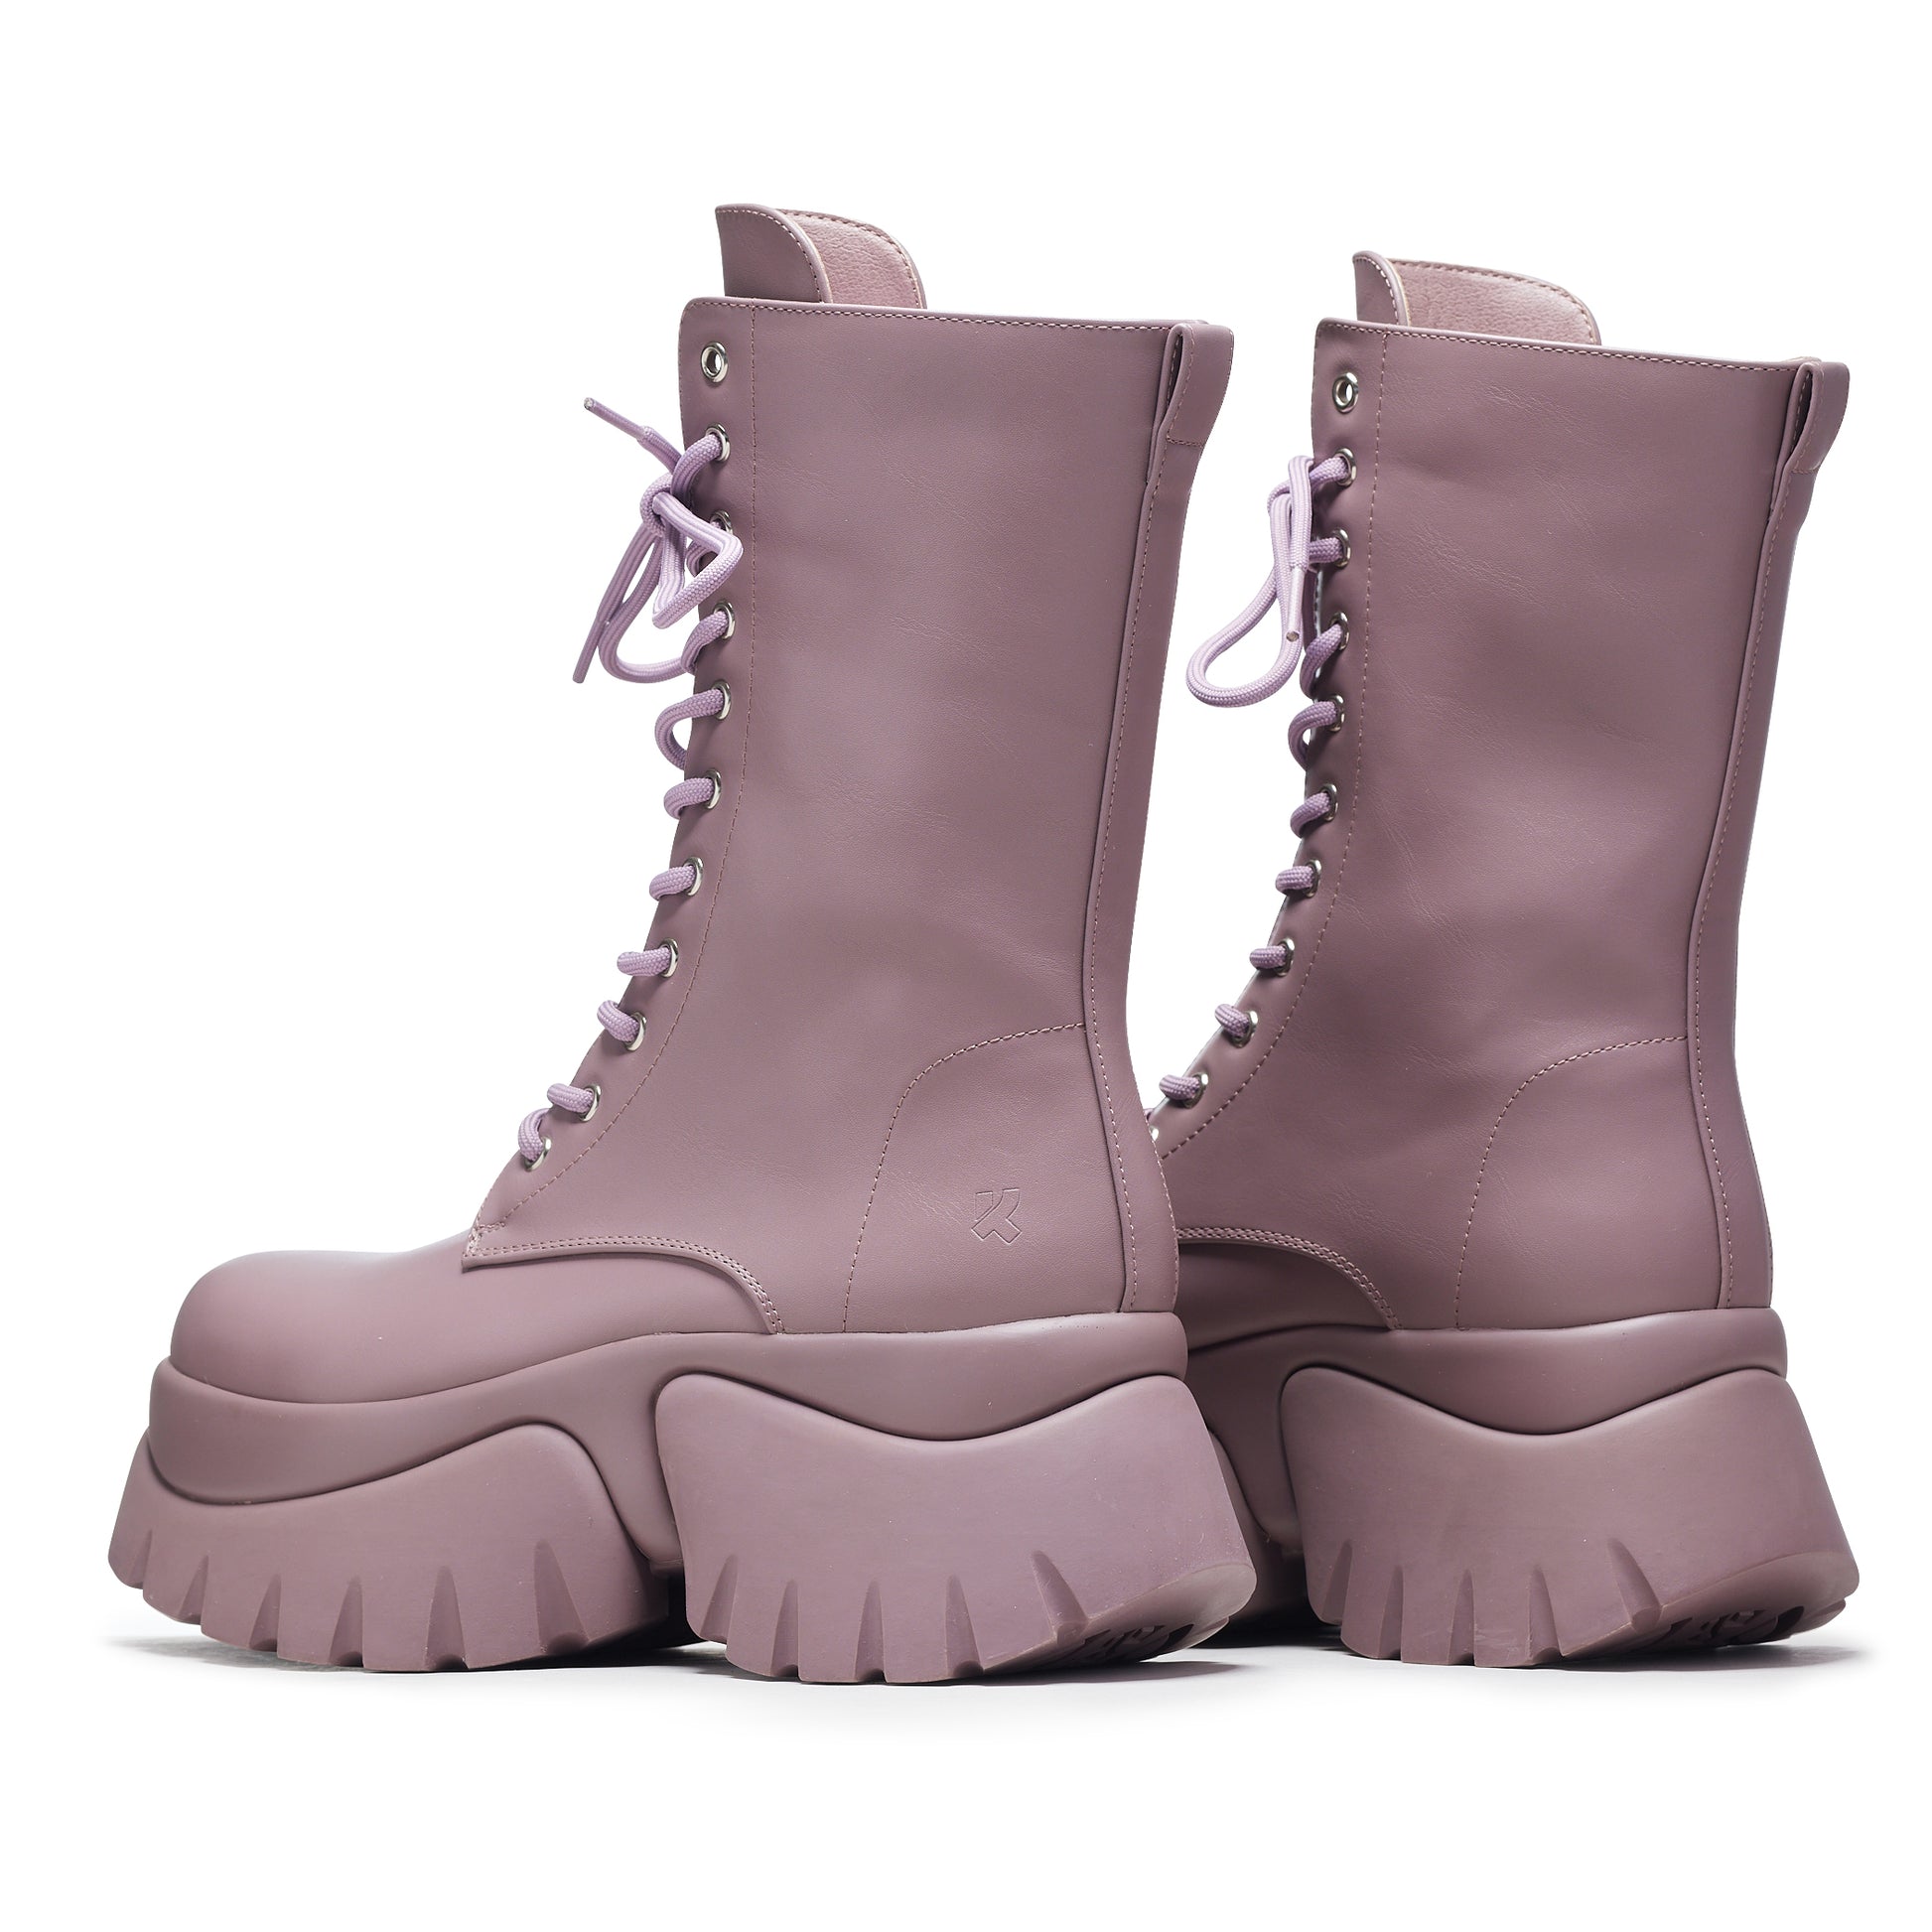 Costal Cruiser Vilun Ankle Boots - Mauve - Ankle Boots - KOI Footwear - Purple - Back Side View